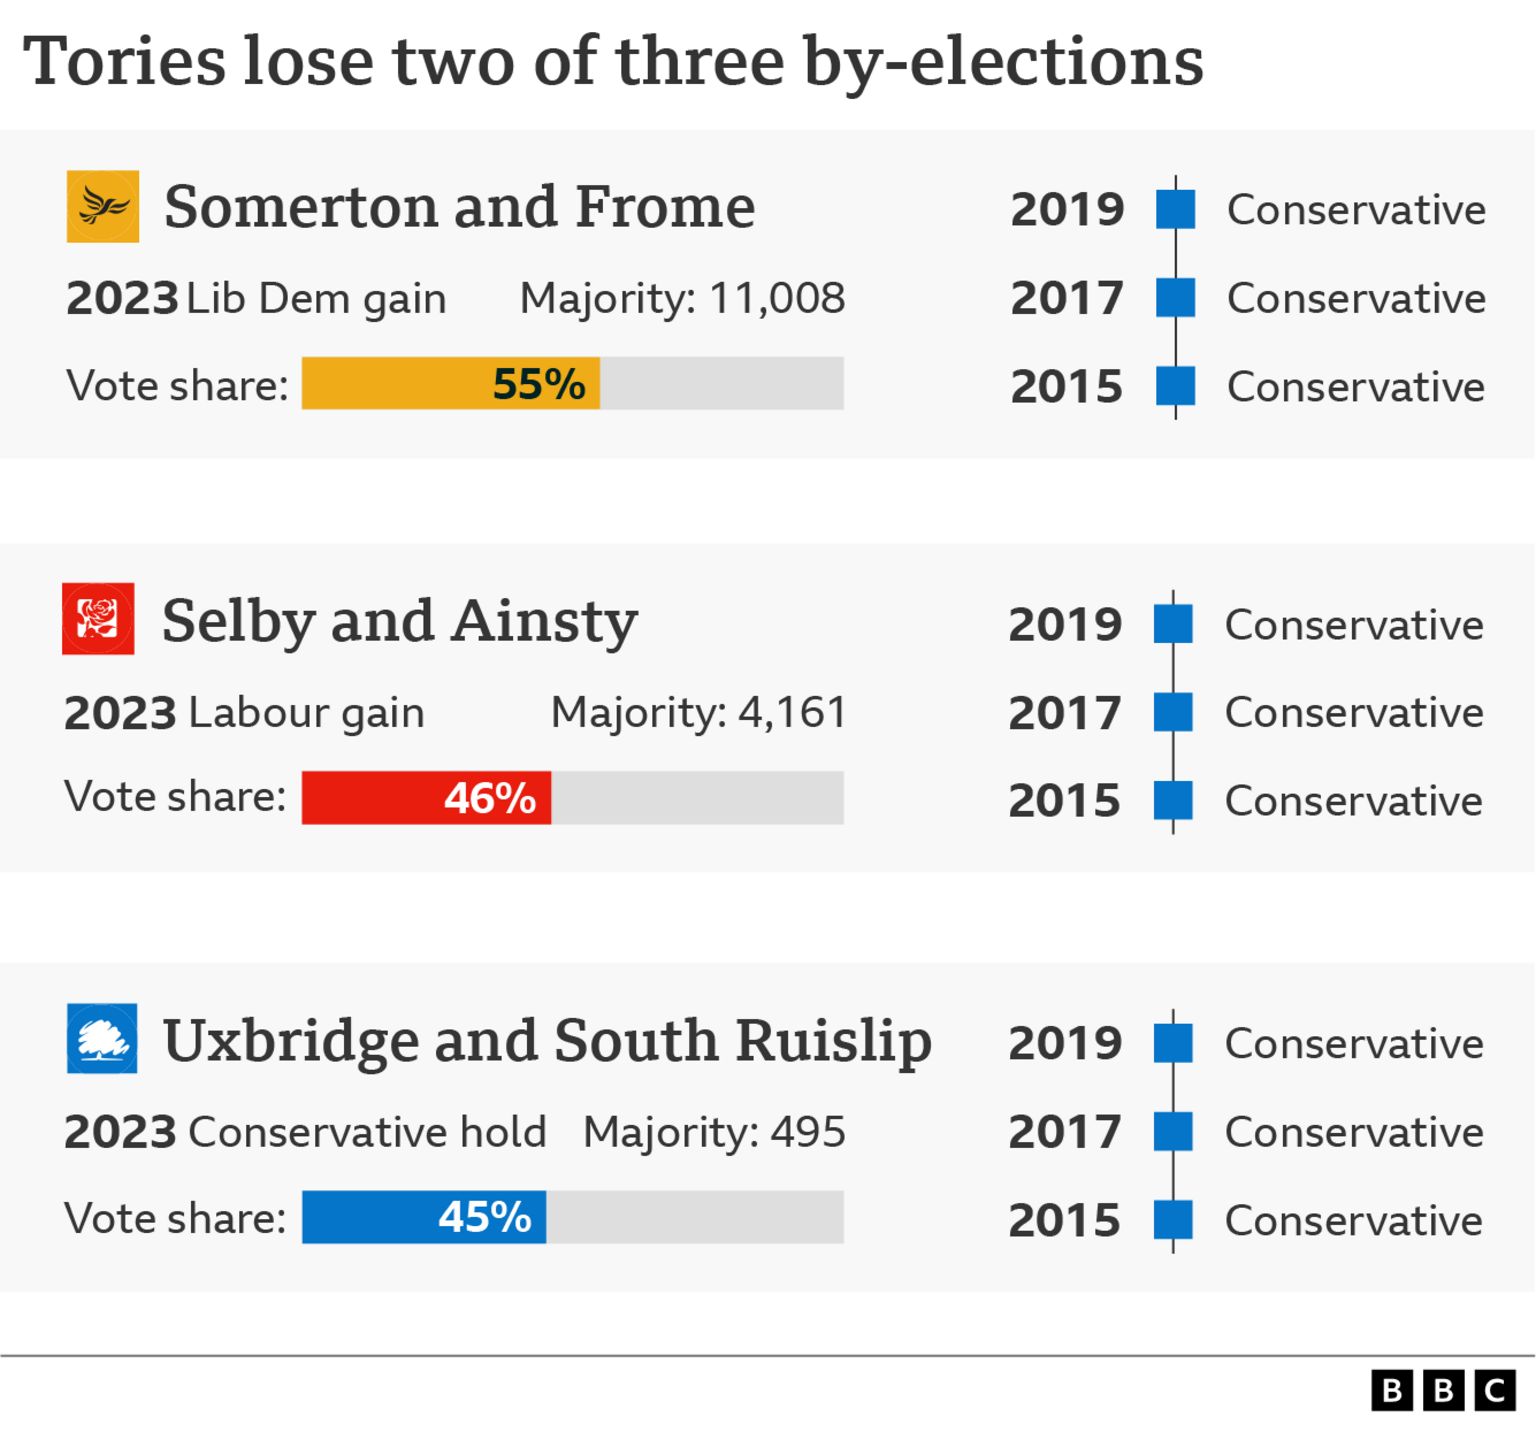 Graphic showing by-election results for Somerton and Frome, Selby and Ainsty, and Uxbridge and South Ruislip